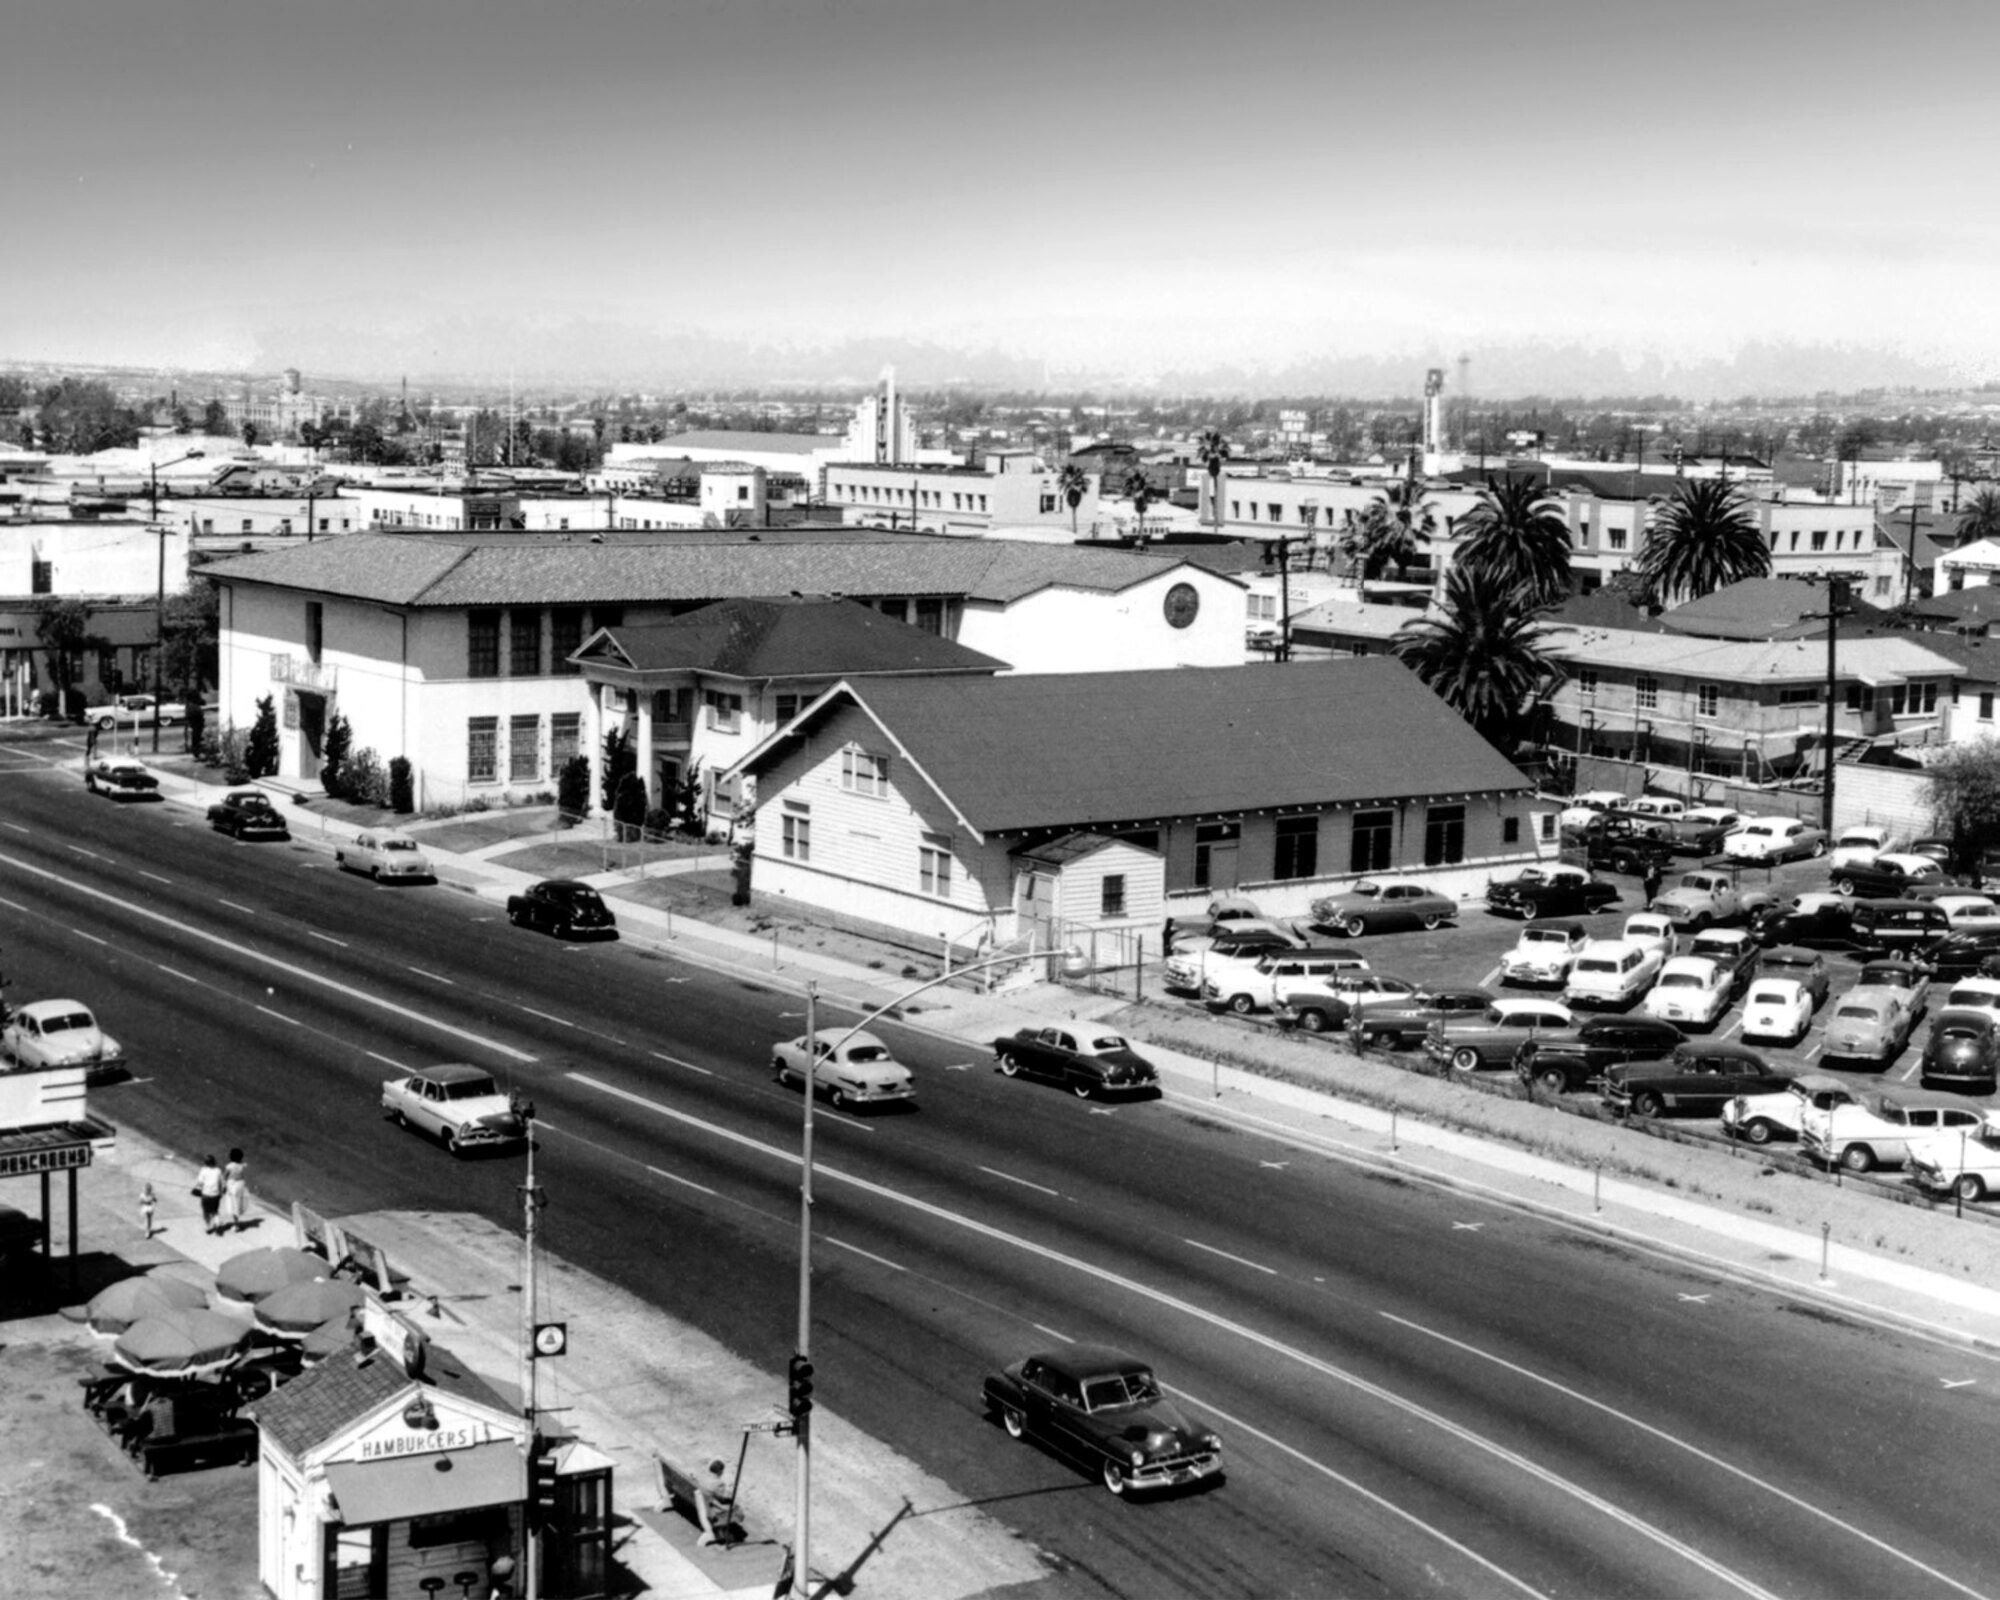 The roots of the Space and Missile Systems Center and Los Angeles Air Force Base date back to June 1954 at a former catholic church and parish schoolhouse on East Manchester Blvd. in Inglewood, Calif. (U.S. Air Force photo)